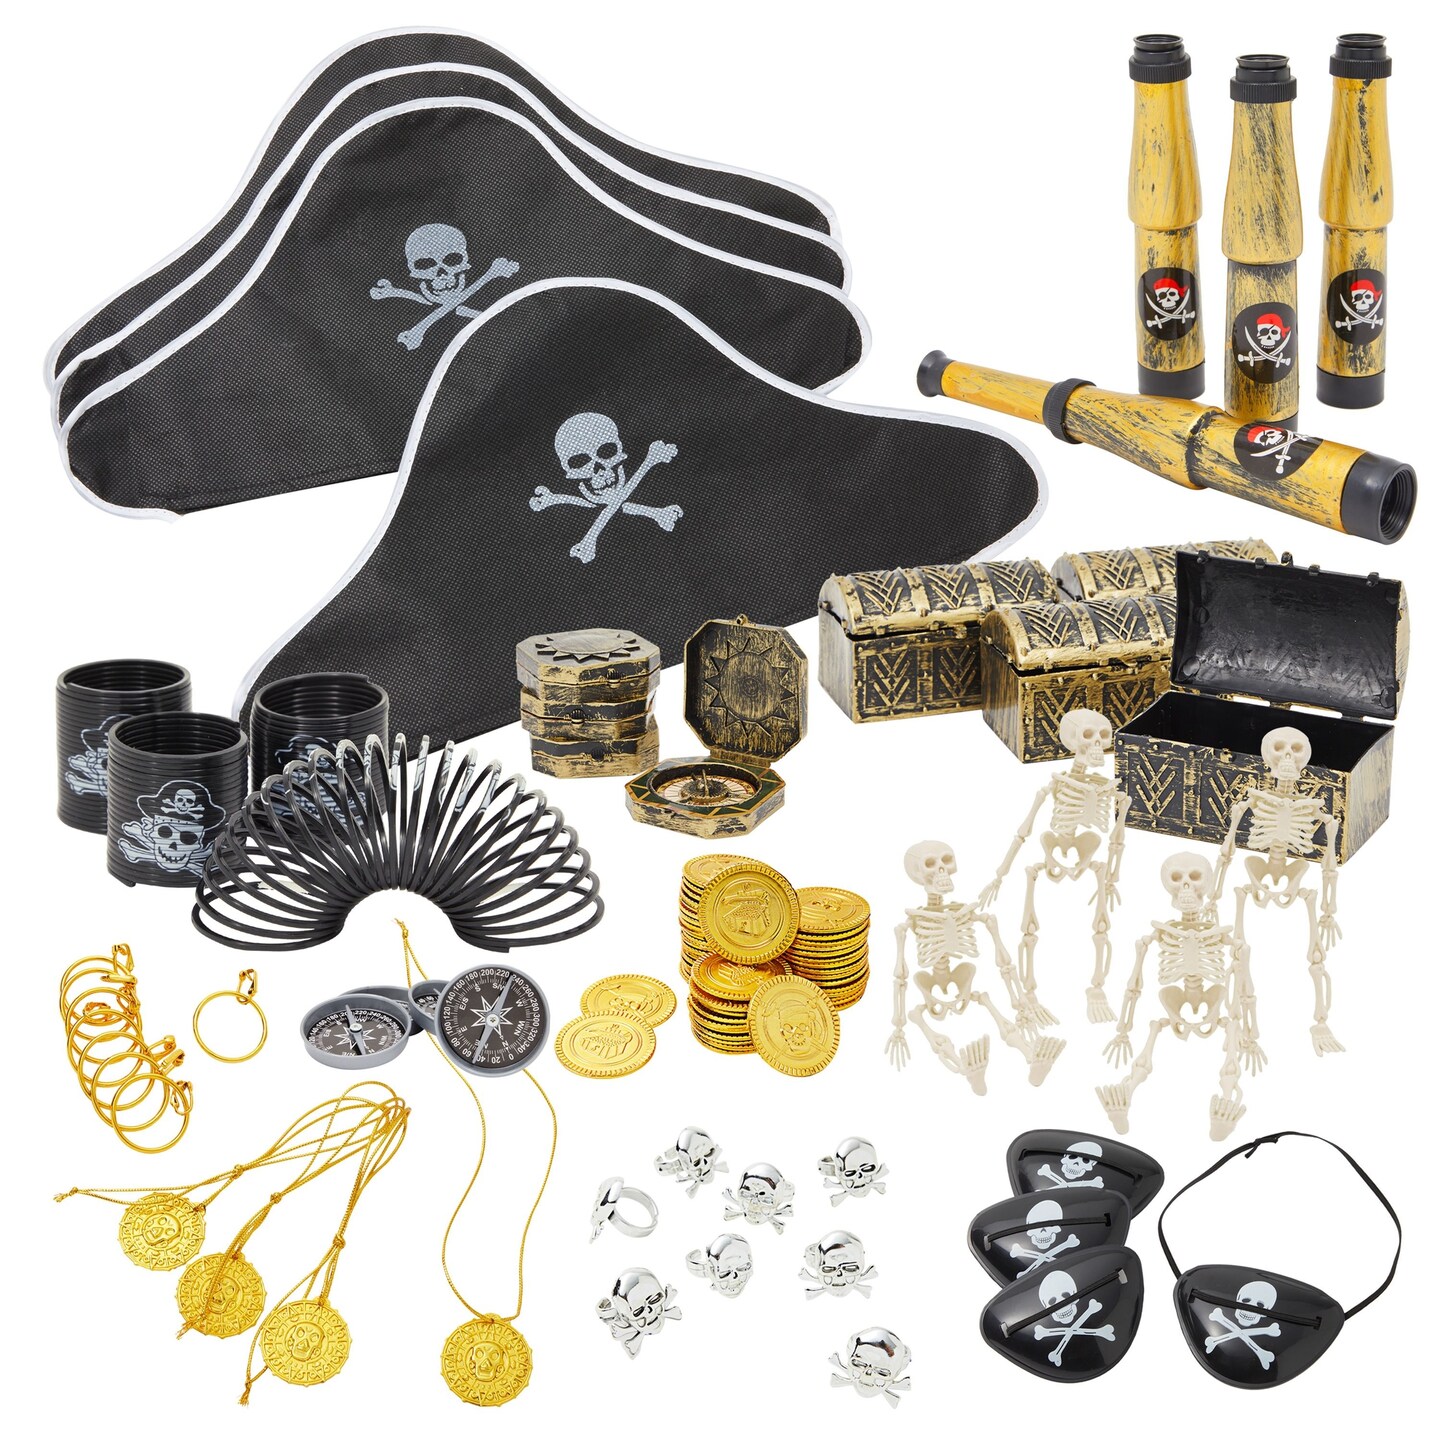 100 Piece Set Pirate Birthday Party Supplies for Kids, Hat, Patch, Compass,  Coins, Toys and Accessories for Party Favors